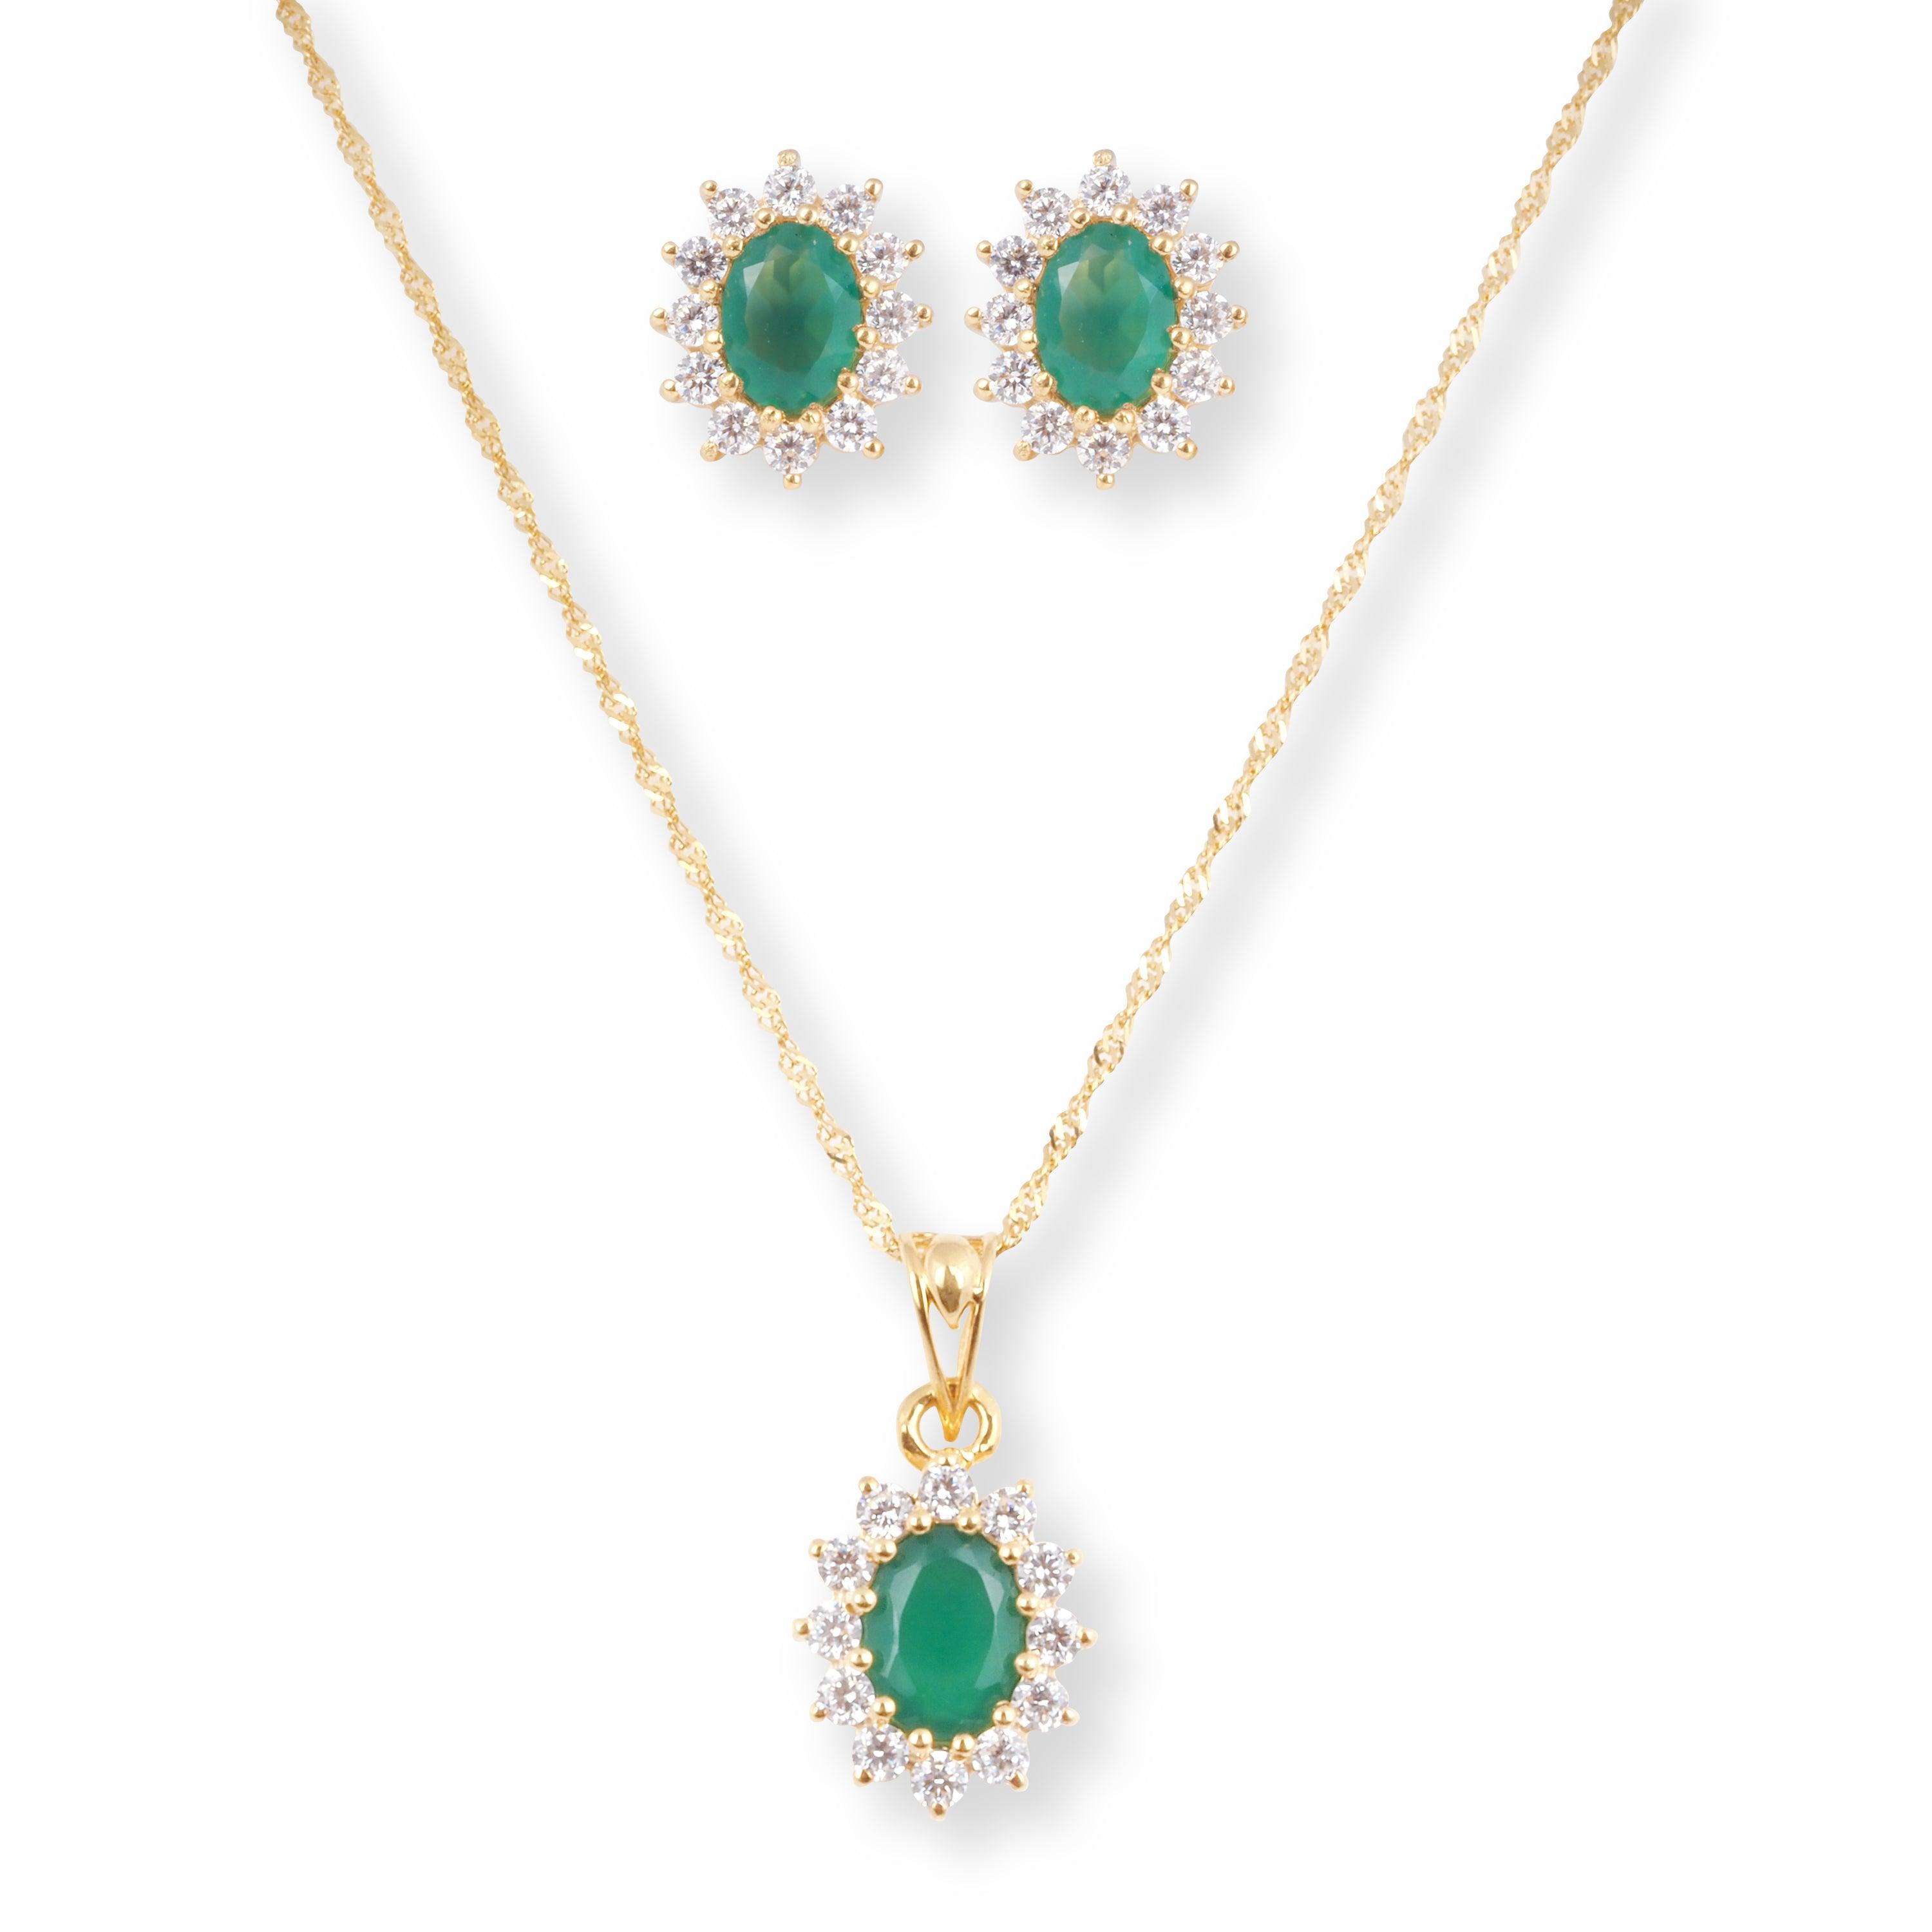 22ct Yellow Gold Pendant Set with Green Stone an Cubic Zirconia Stones P-8003 E-8003A - Minar Jewellers